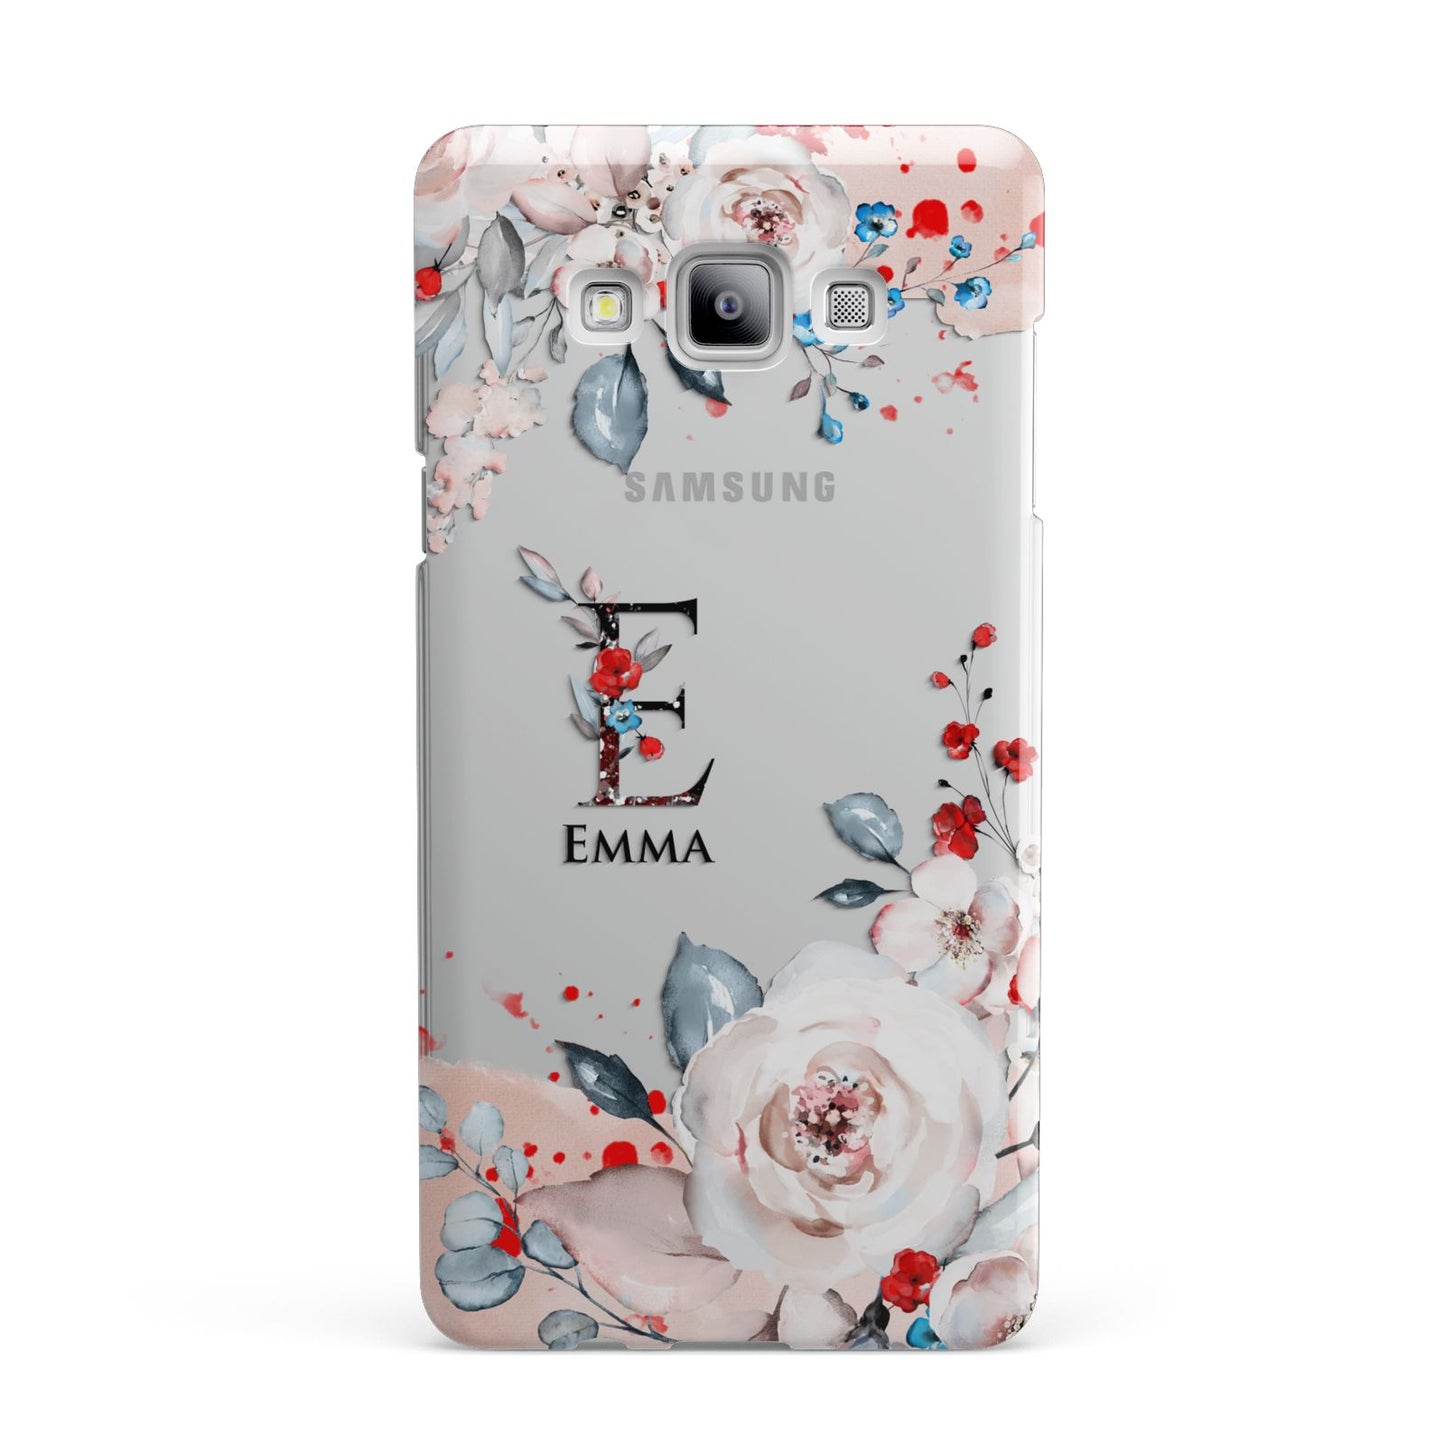 Monogrammed Roses Floral Wreath Samsung Galaxy A7 2015 Case